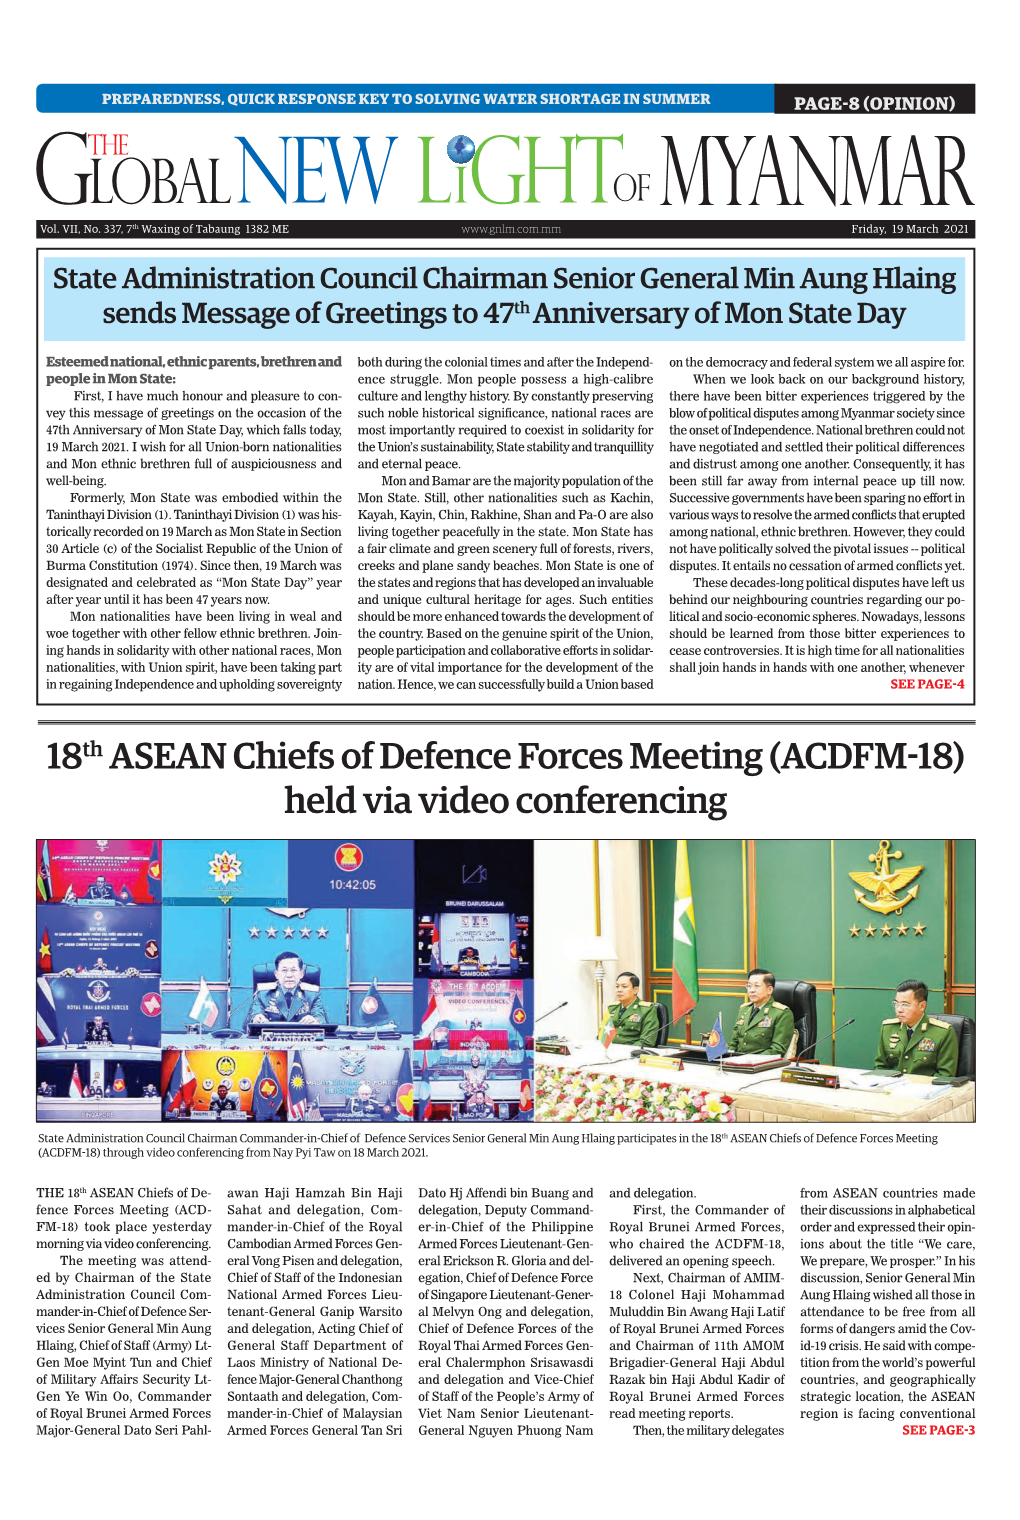 18Th ASEAN Chiefs of Defence Forces Meeting (ACDFM-18) Held Via Video Conferencing